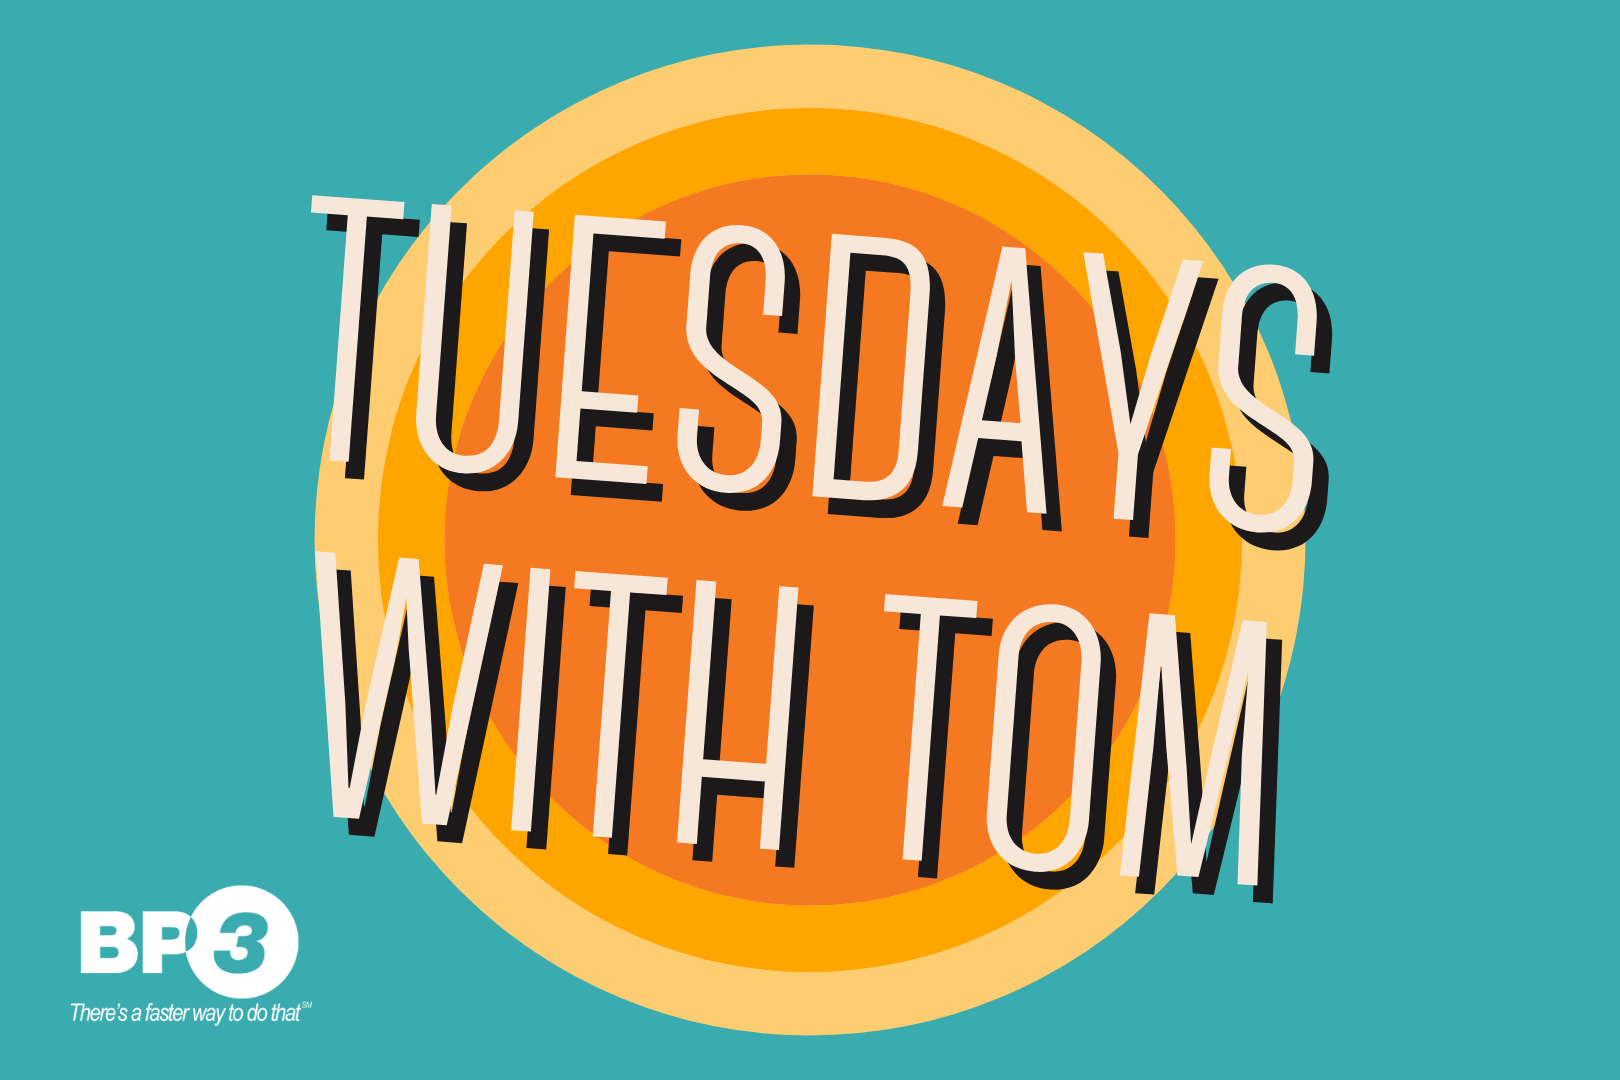 Tuesdays with Tom: Optical Character Recognition Engine